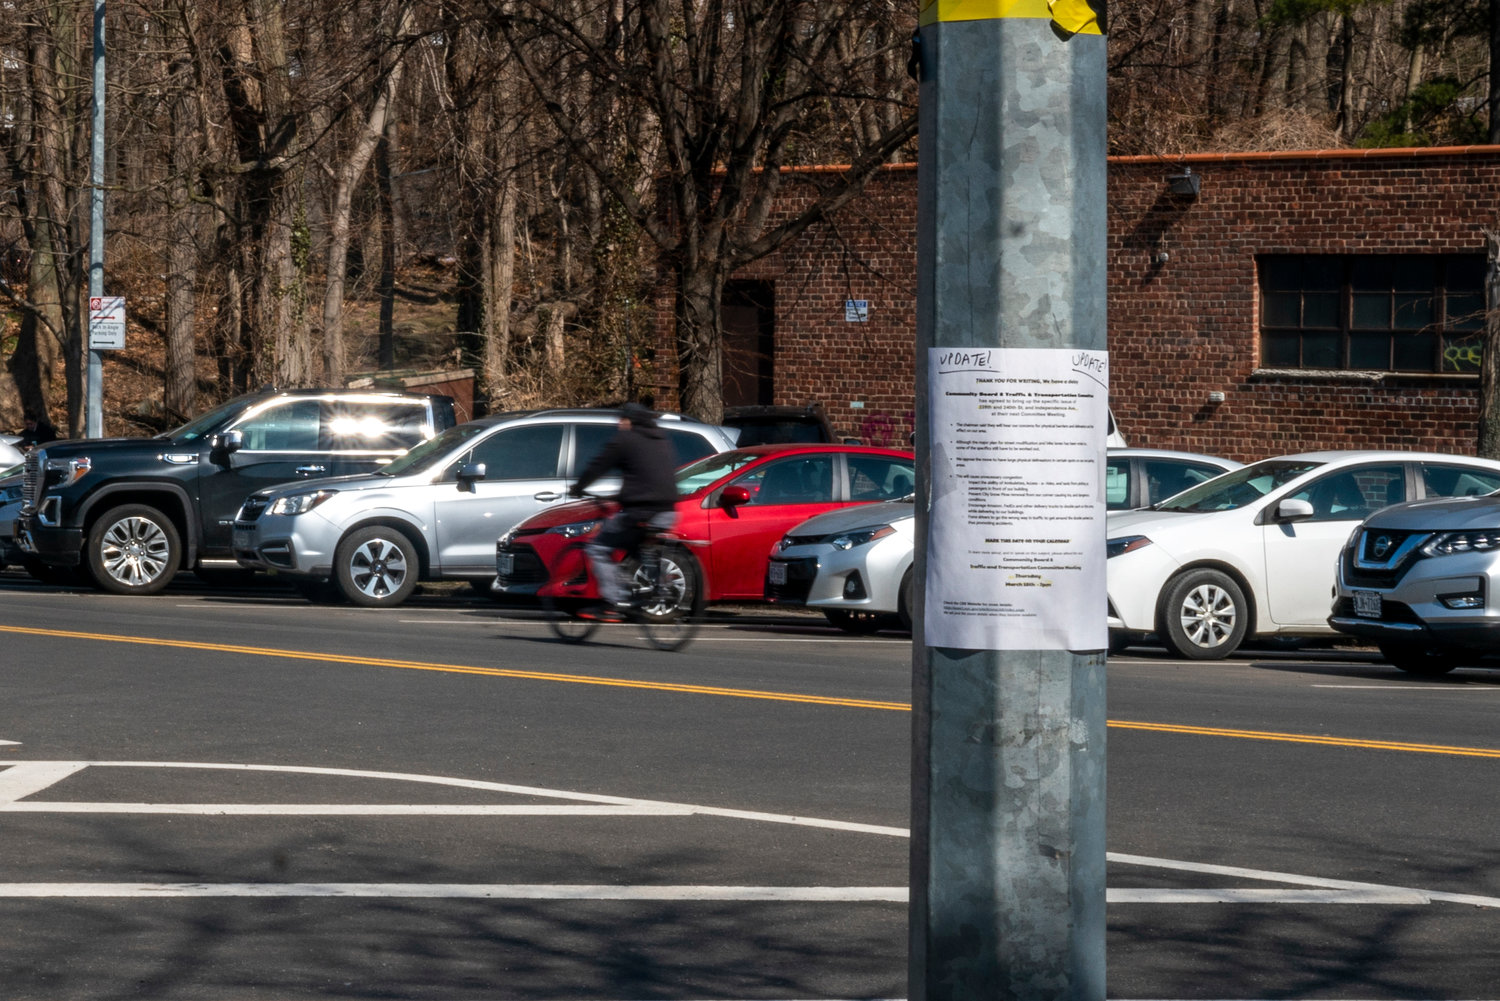 It looked as though Community Board 8’s traffic and transportation committee was finally getting somewhere developing recommendations to curb reckless driving along Independence Avenue. But random flyers anonymously posted in the neighborhood criticizing details of the process has forced the committee to start back almost at square one.